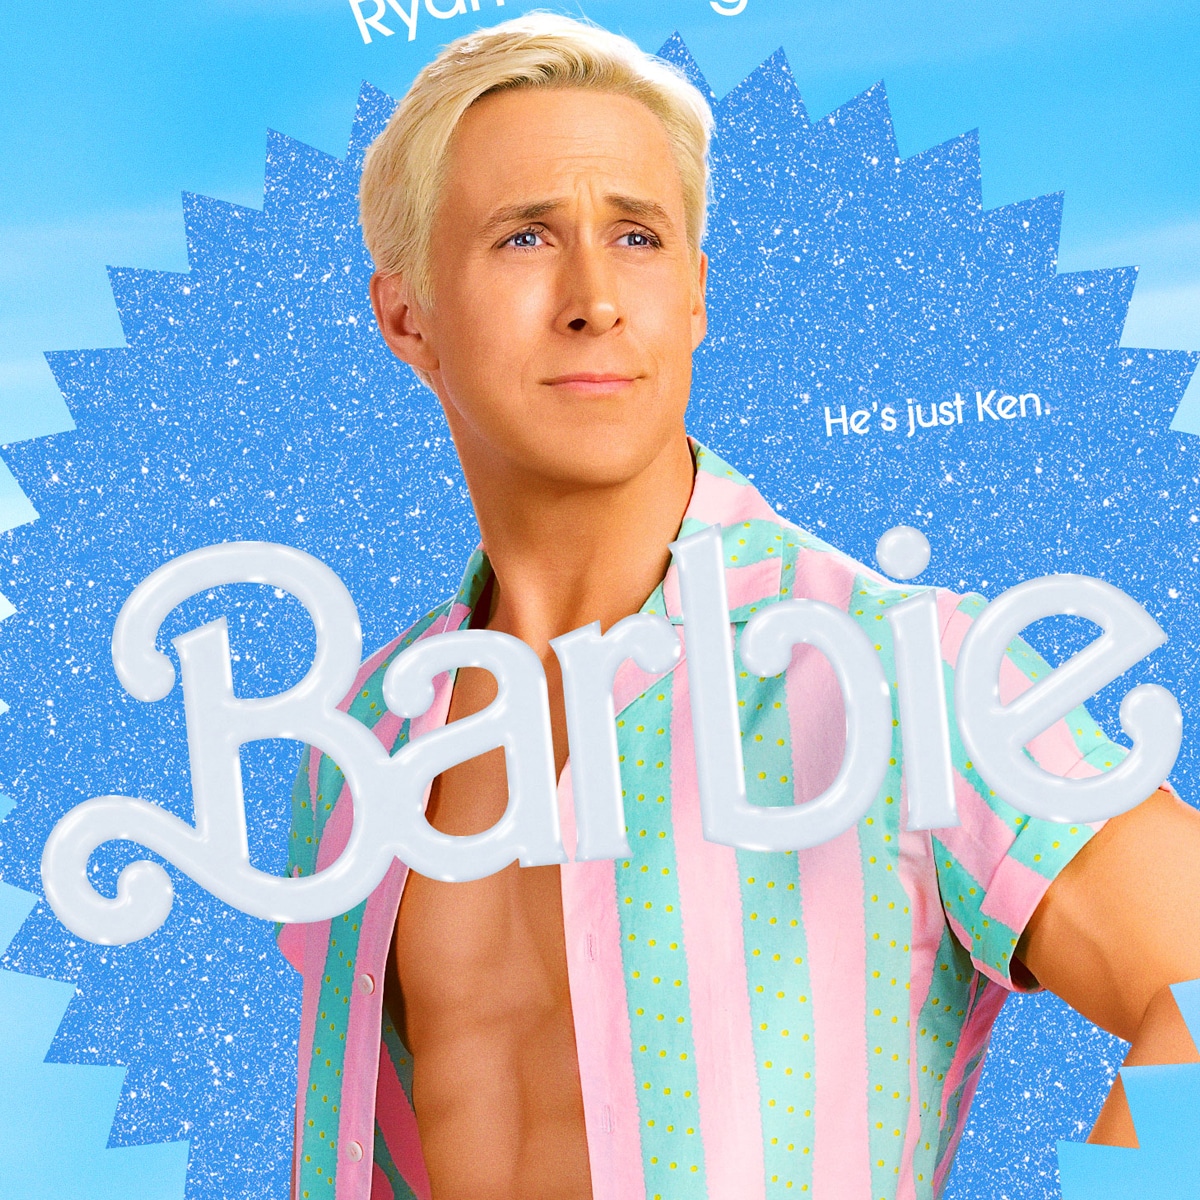 https://akns-images.eonline.com/eol_images/Entire_Site/202334/rs_1200x1200-230404092828-1200-BARBIE_Character_RYAN_InstaVert_1638x2048_DOM.jpg?fit=around%7C1200:1200&output-quality=90&crop=1200:1200;center,top